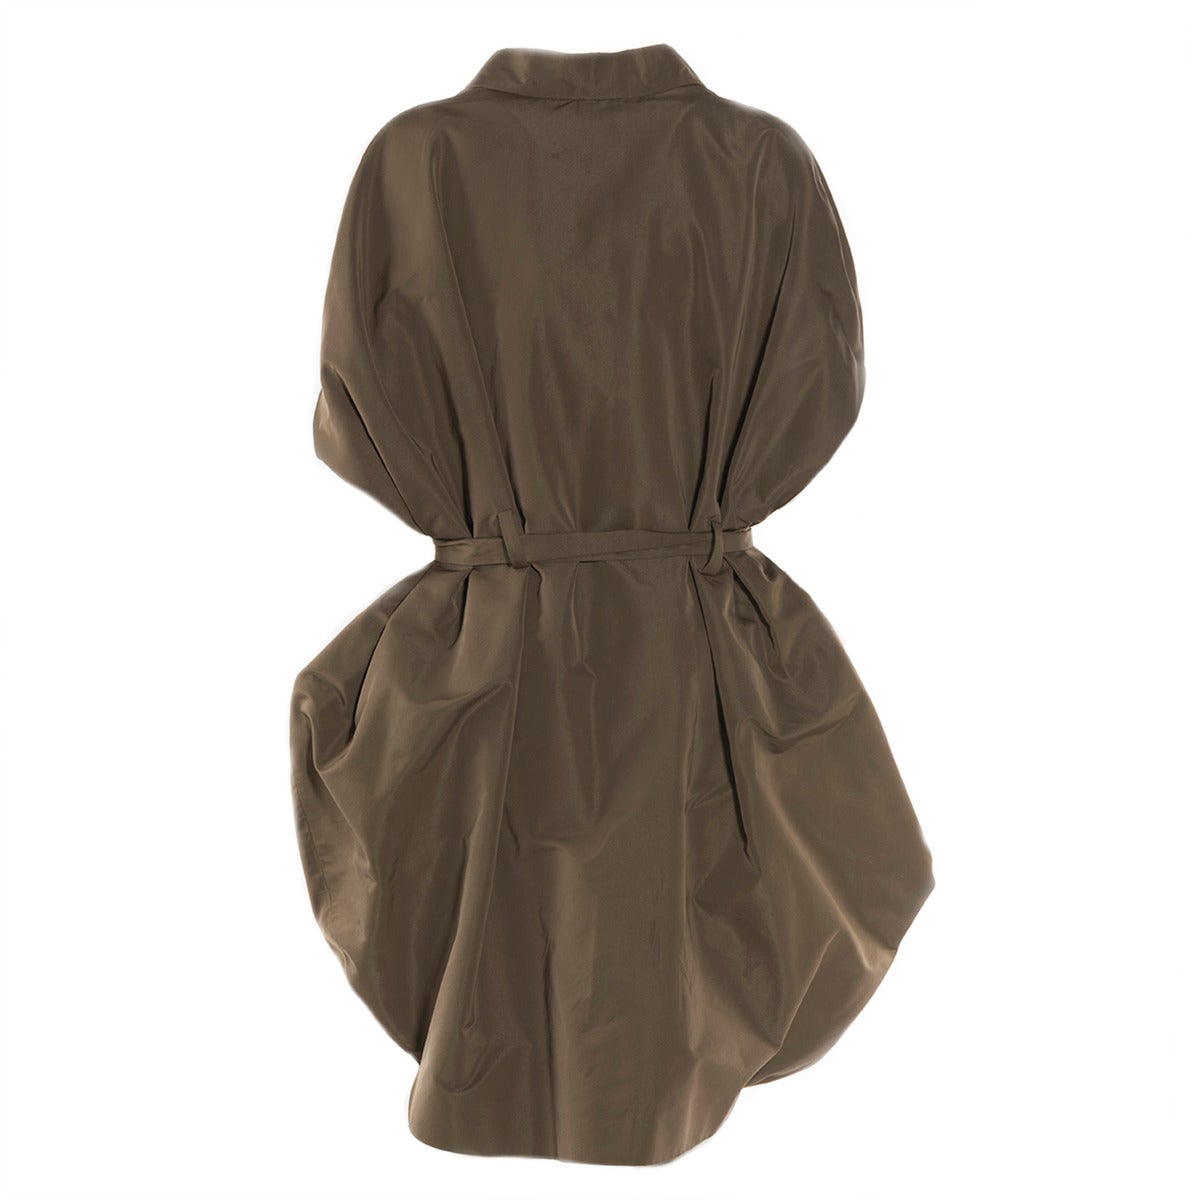 Fantastic construction for this Vionnet Paris trench
Grey turteldove color
Fabric: Silk and polyester
With belt
Covered small double breasted buttons
Made in Italy
Worldwide express shipping included in the price